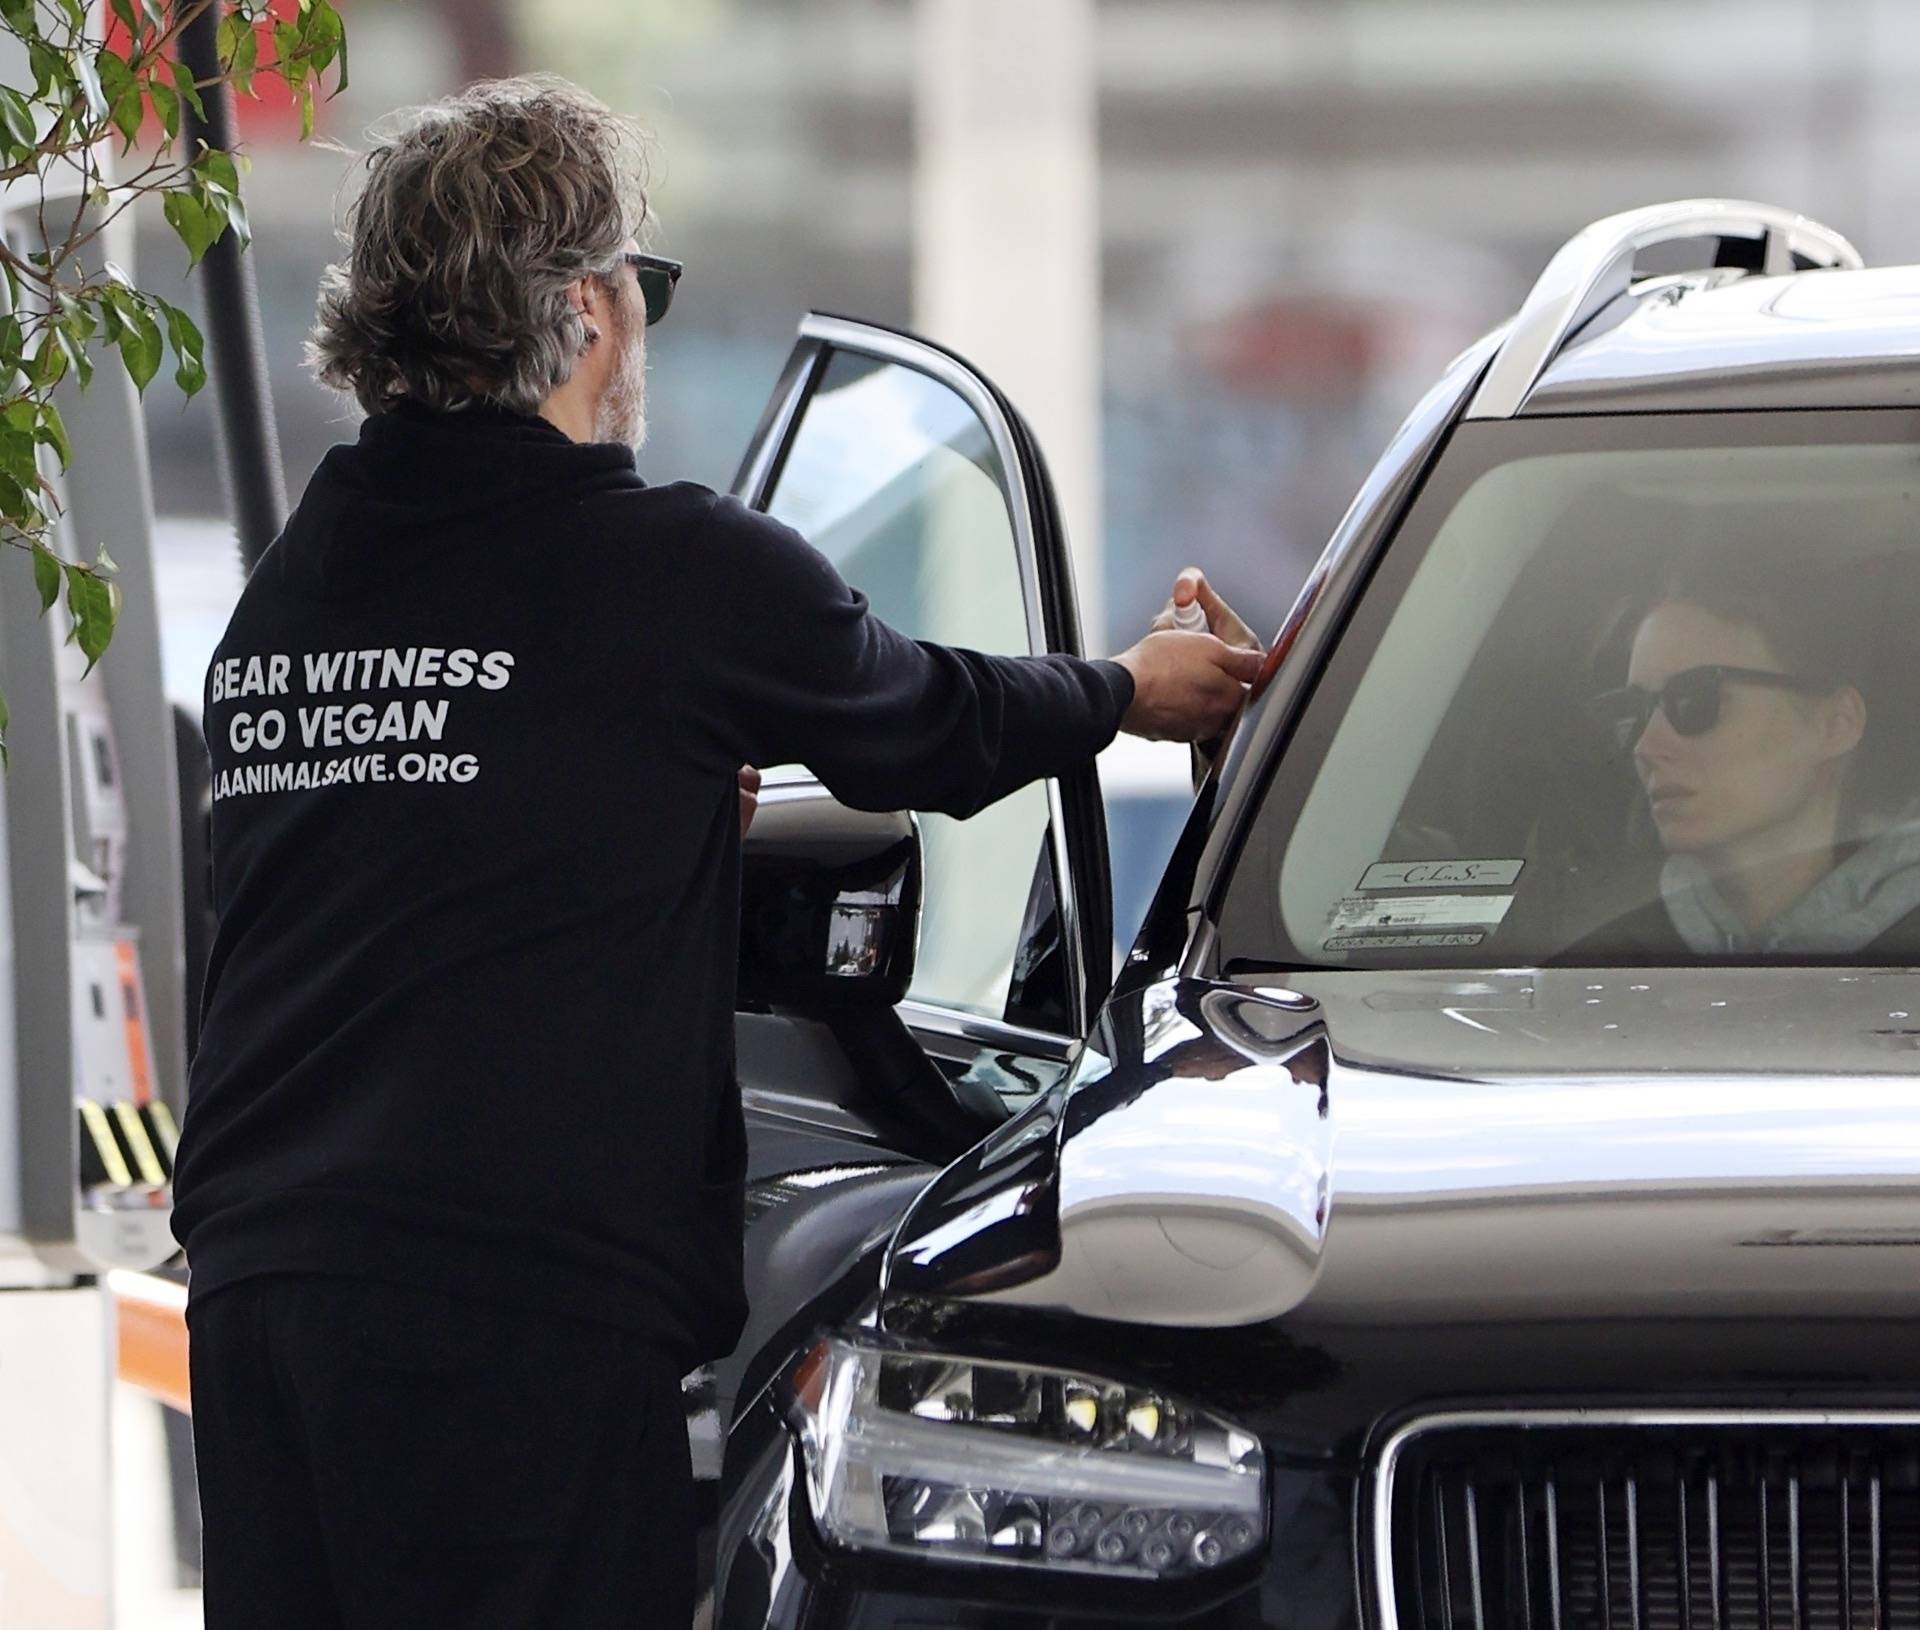 *EXCLUSIVE* Joaquin Phoenix and Rooney Mara are taking no risk with the coronavirus as they stop for gas